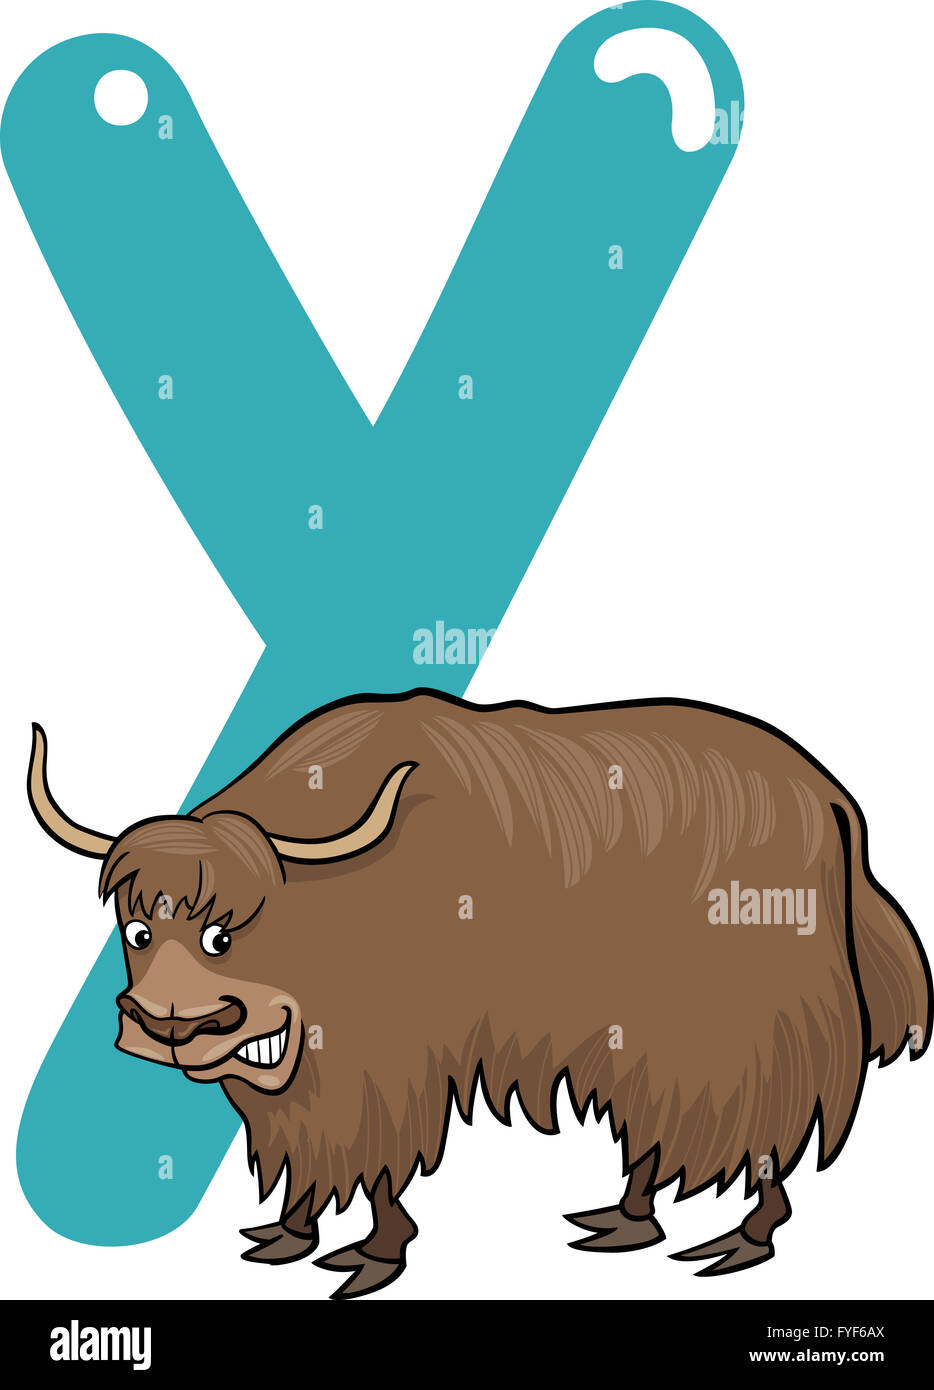 Y for yak Stock Photo